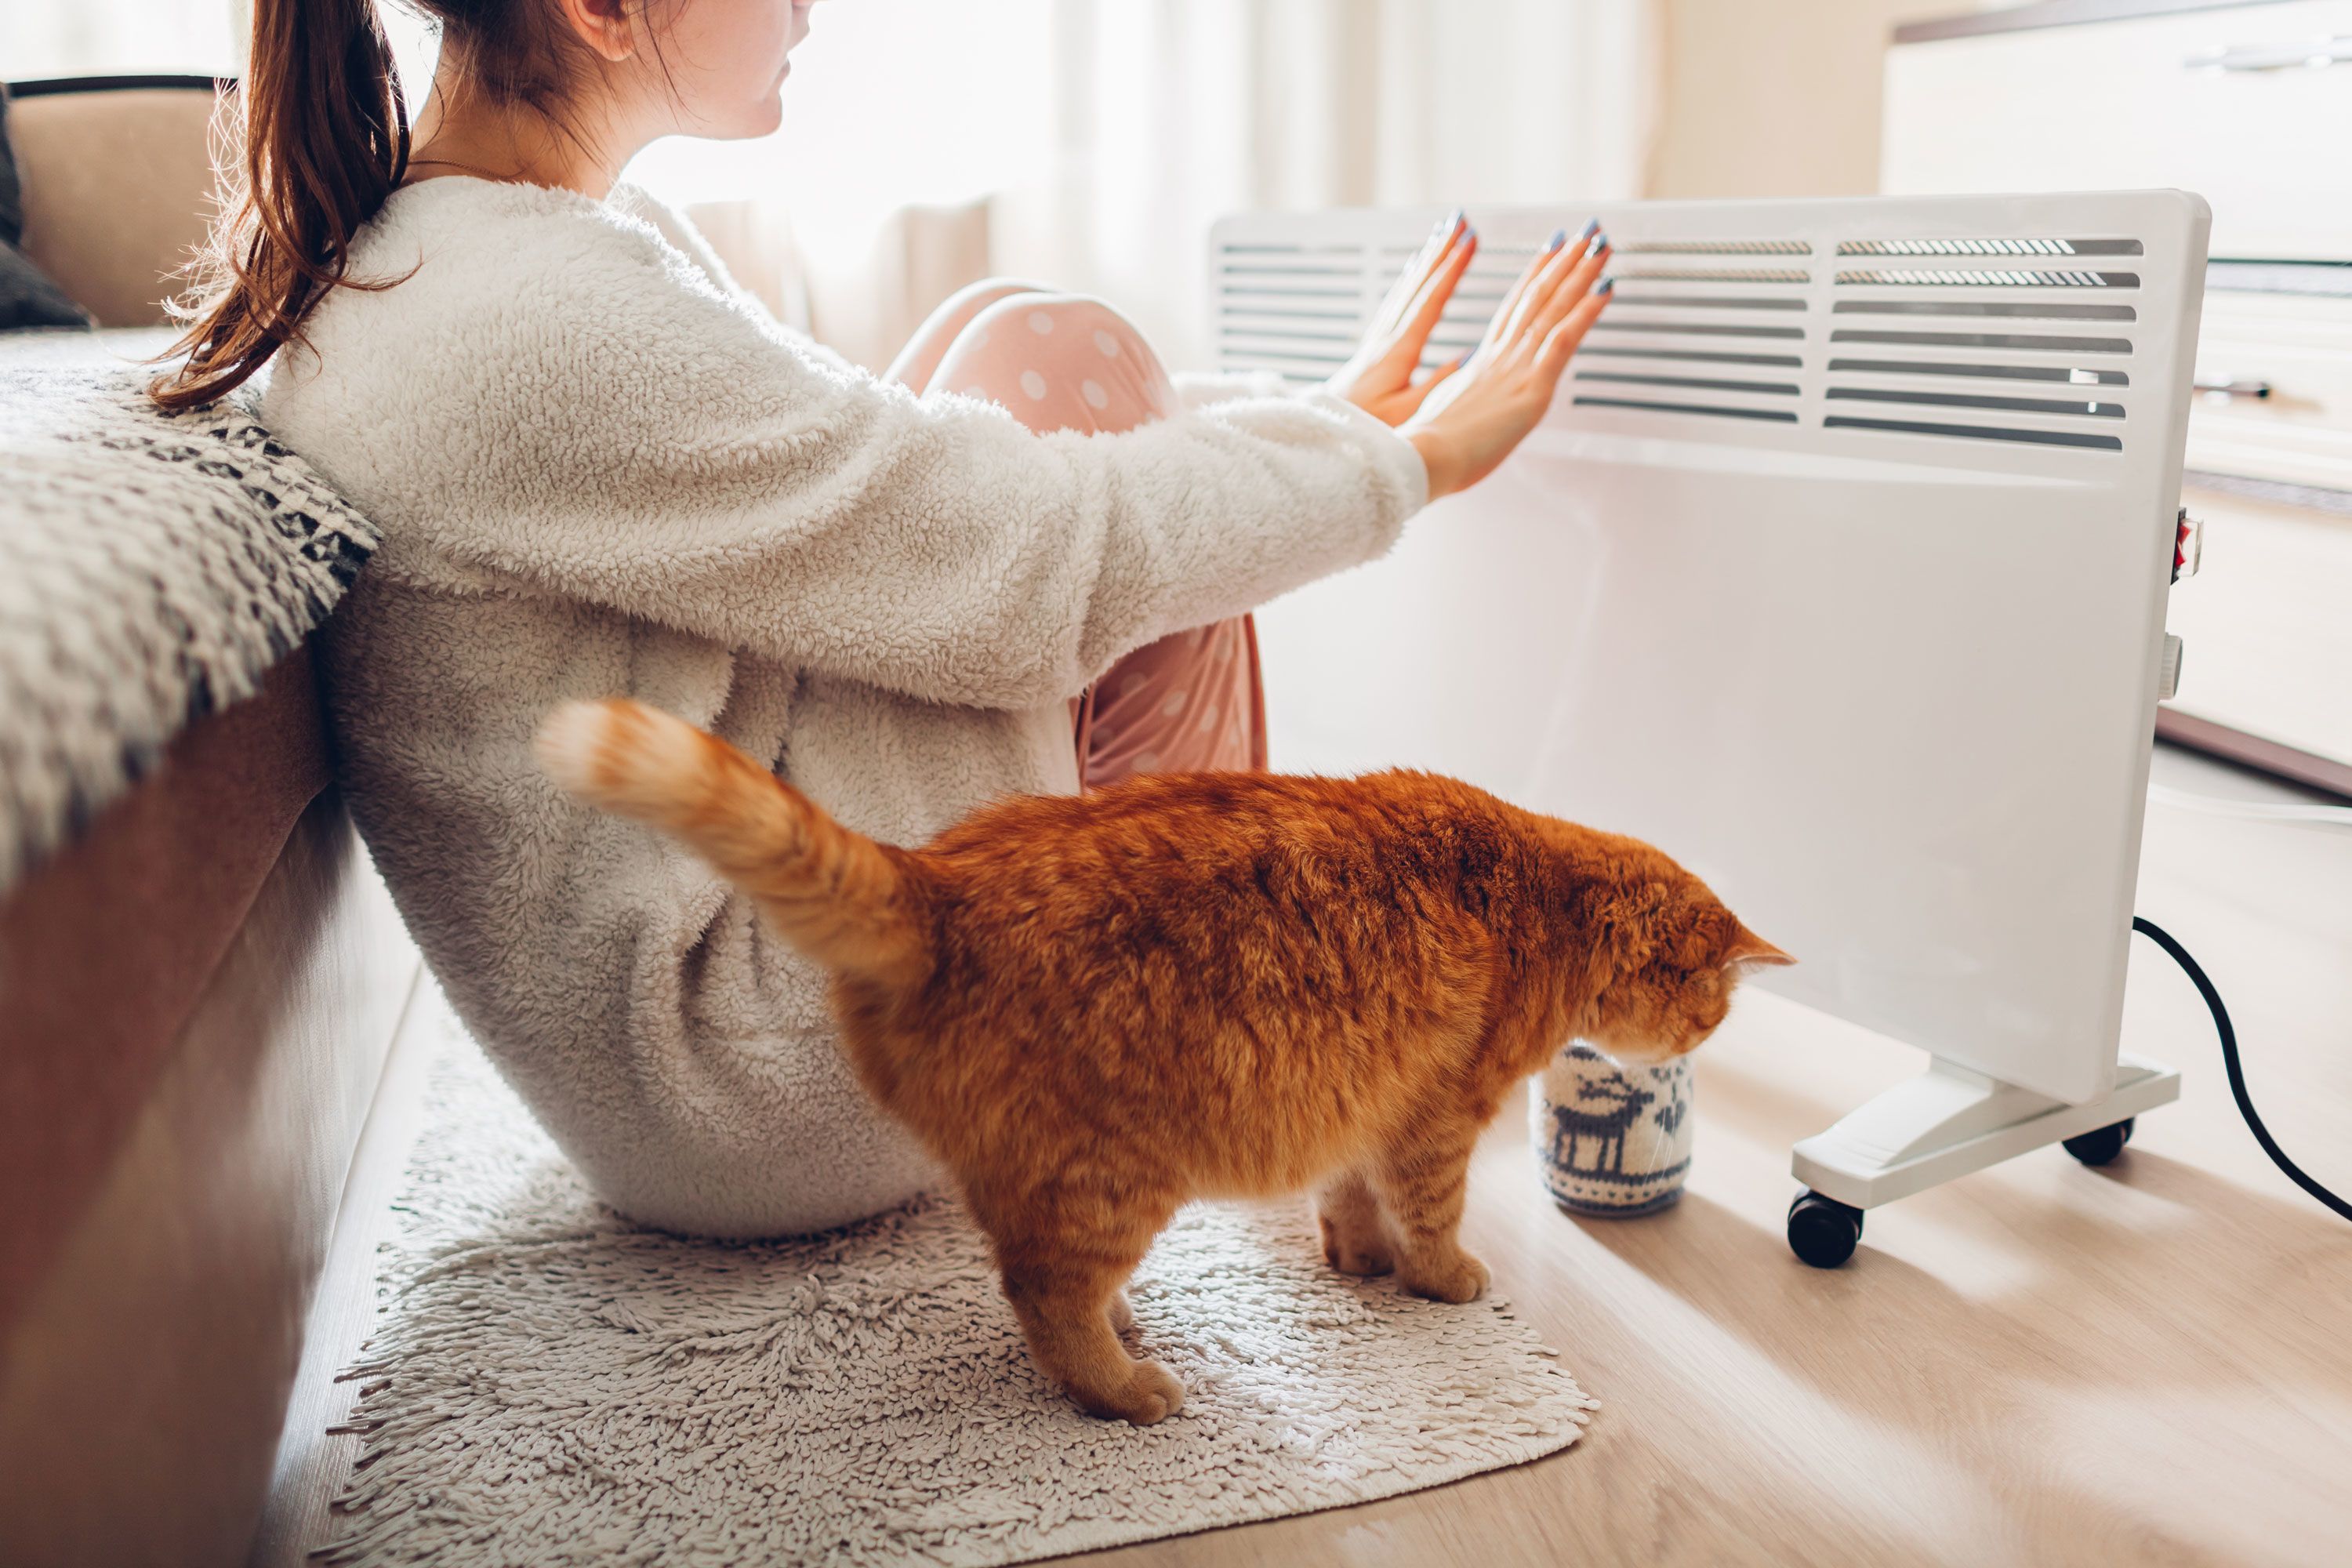 9 Strategies to Stay Cozy Warm Without Running up Your Heating